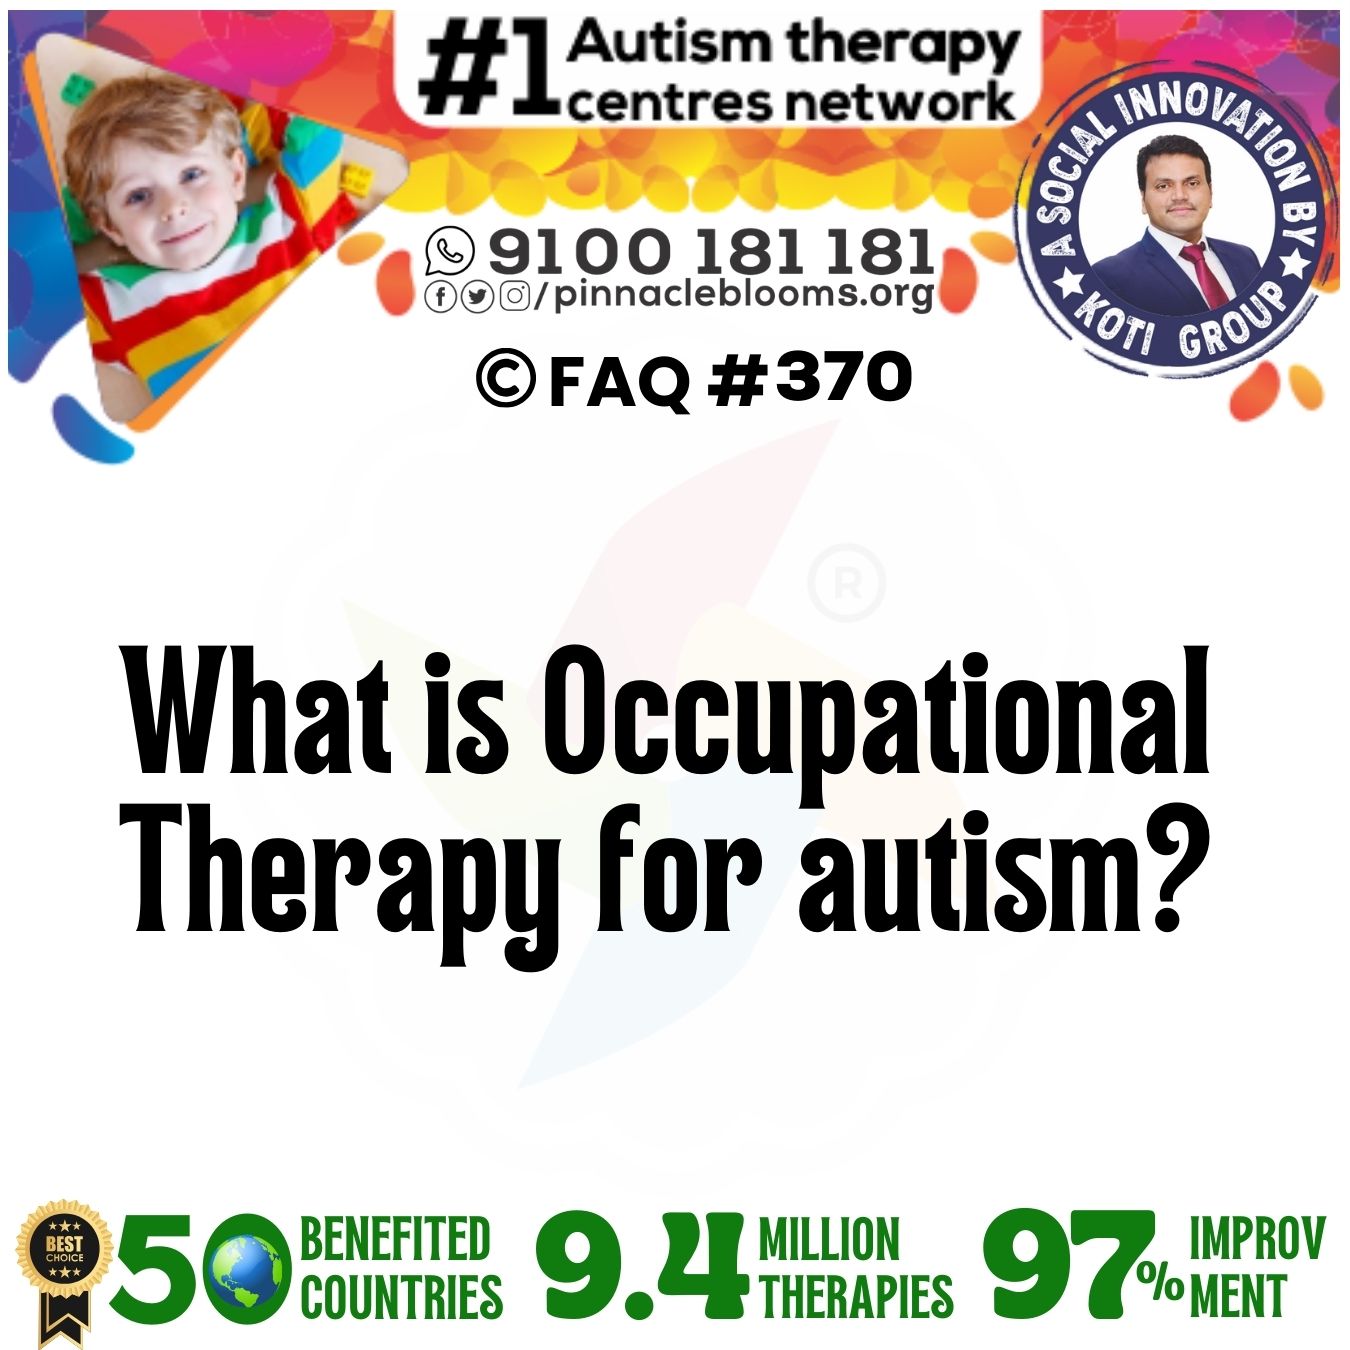 What is Occupational Therapy for autism?